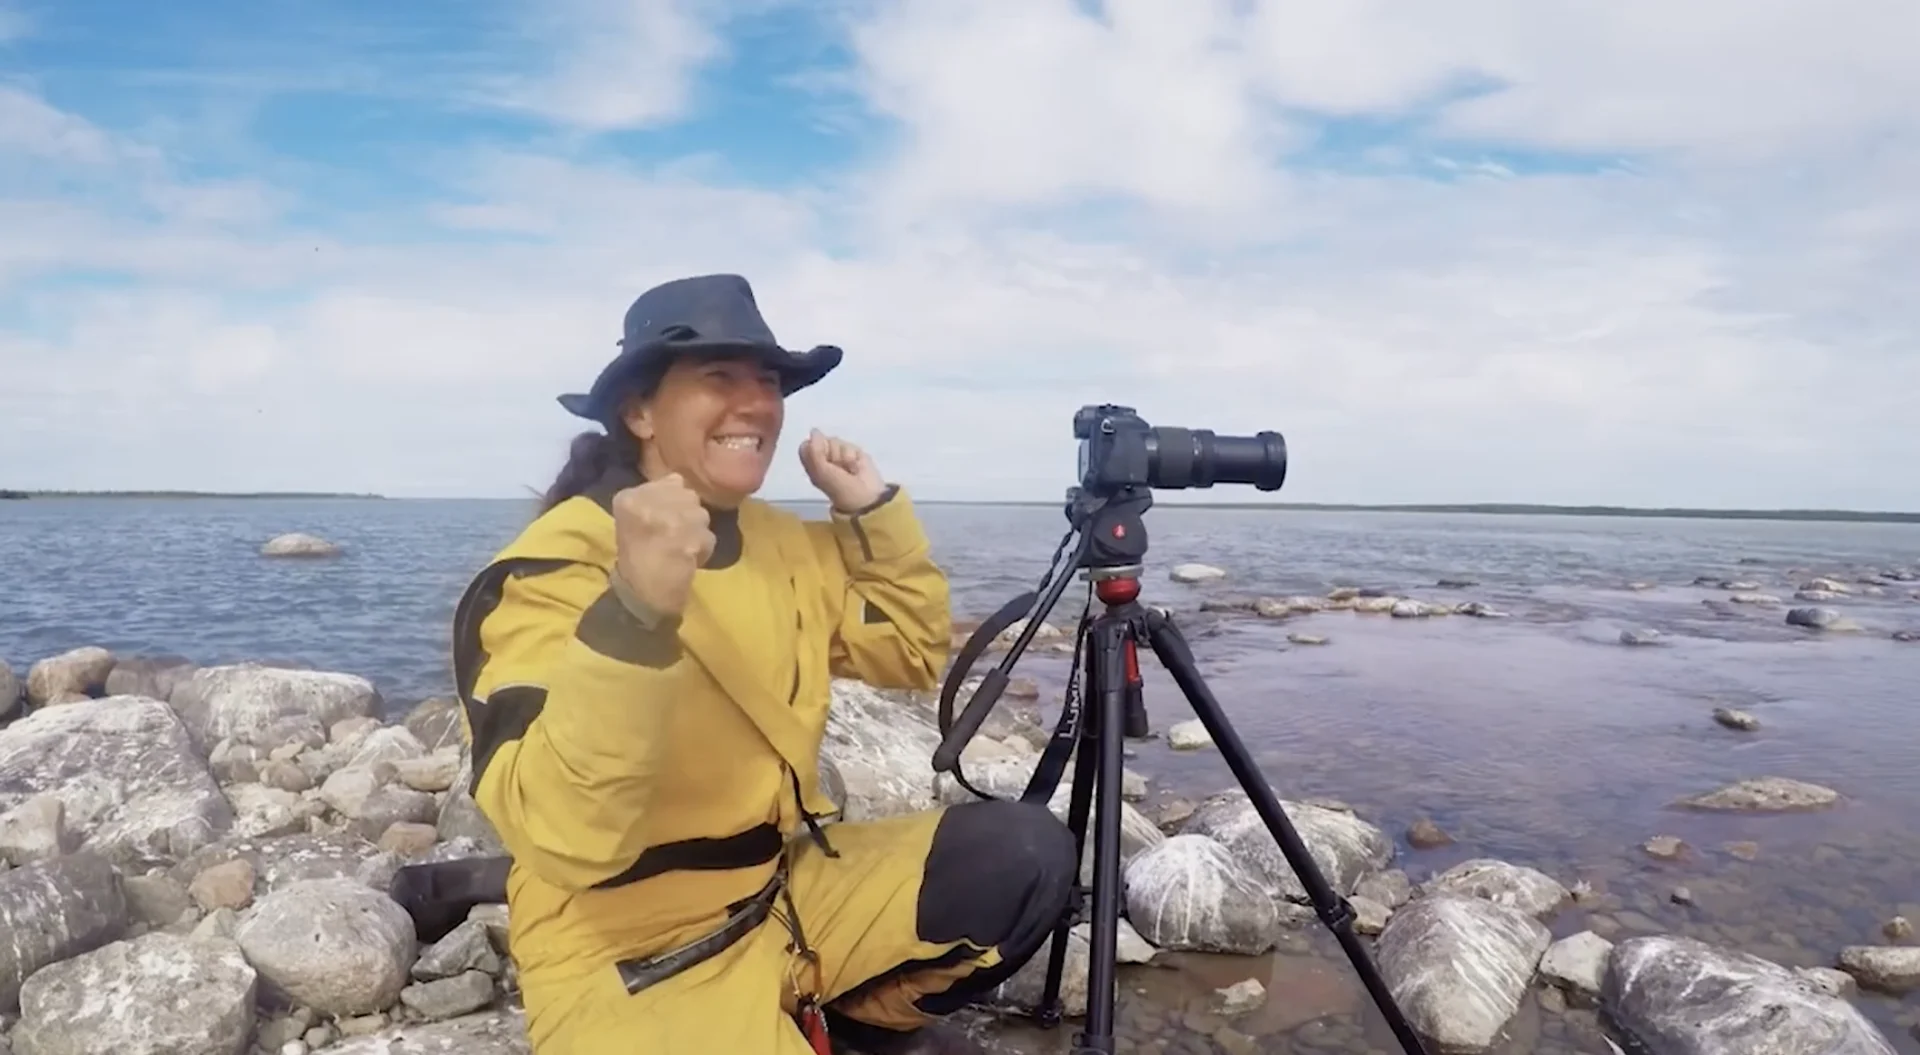 Meet the woman who completed the entire Trans Canada Trail, and filmed it all